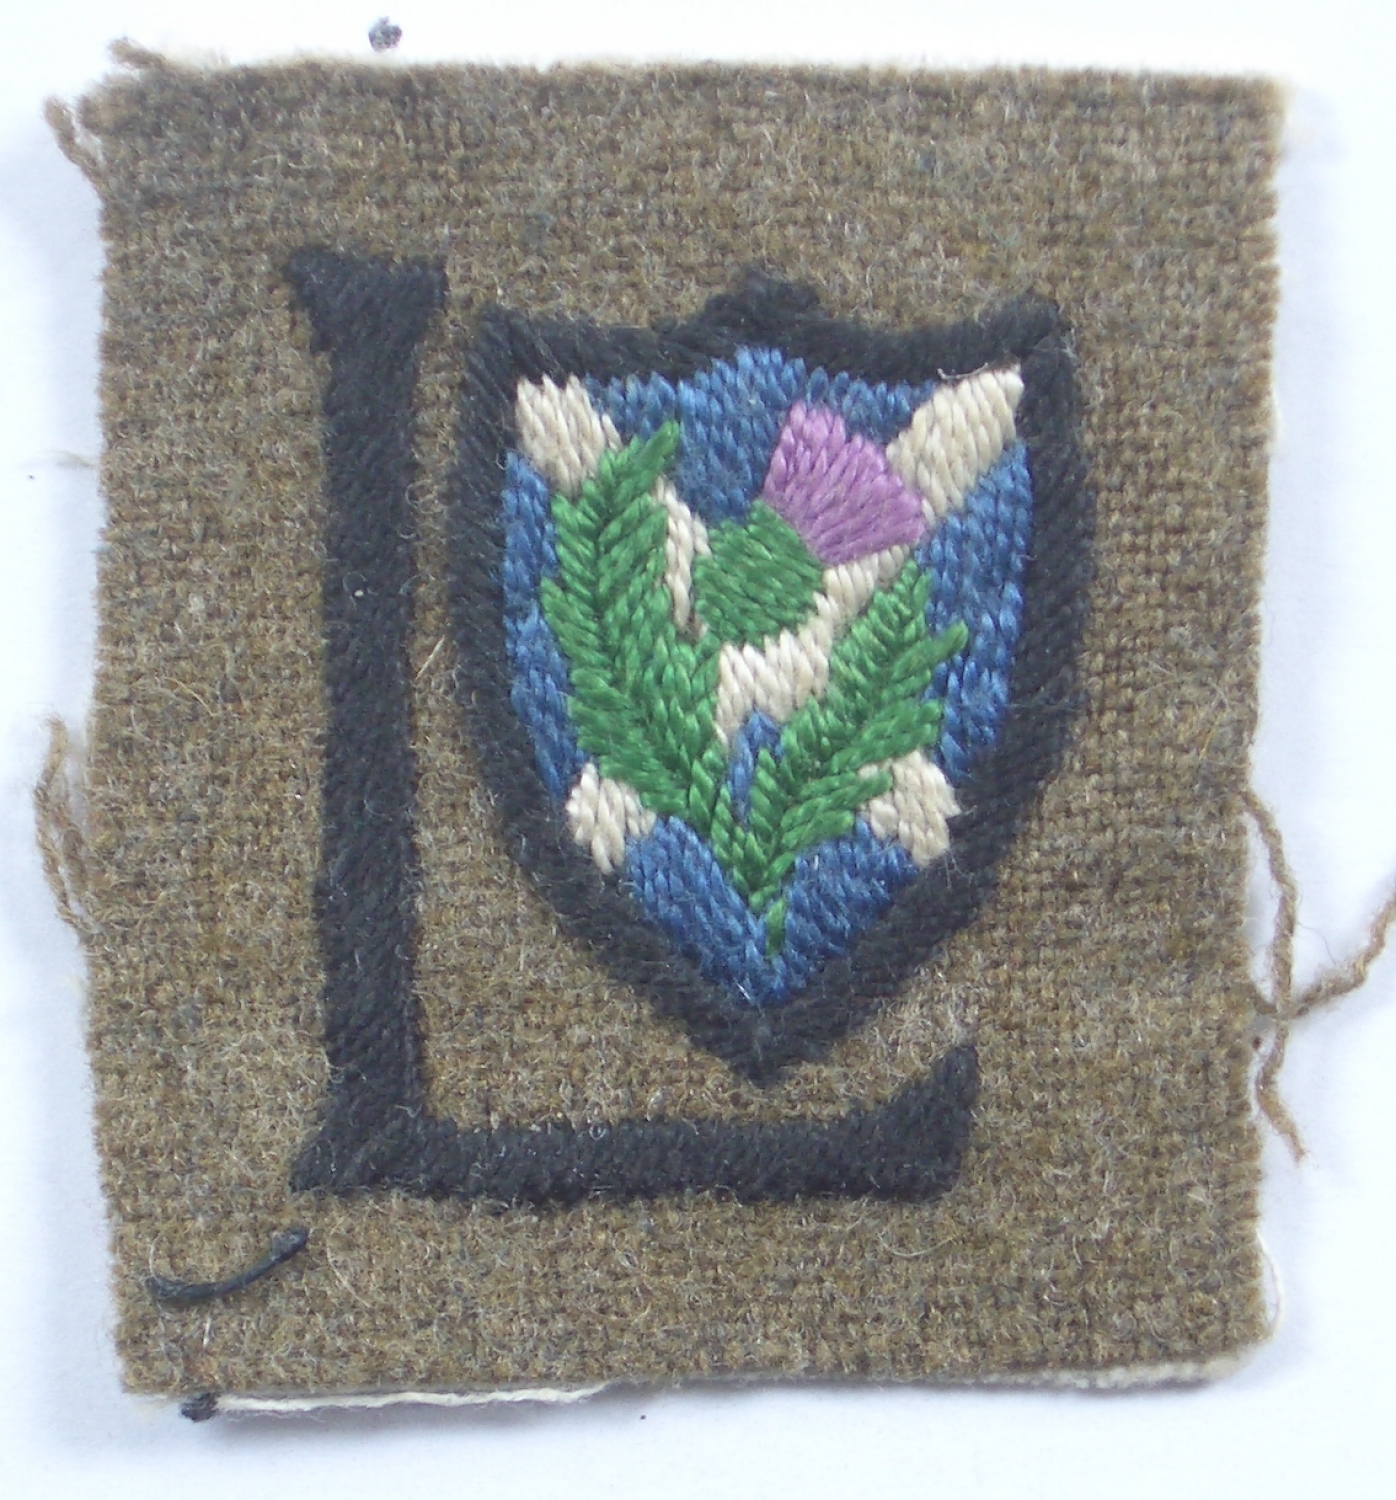 52nd Lowland Division WW1 formation sign.